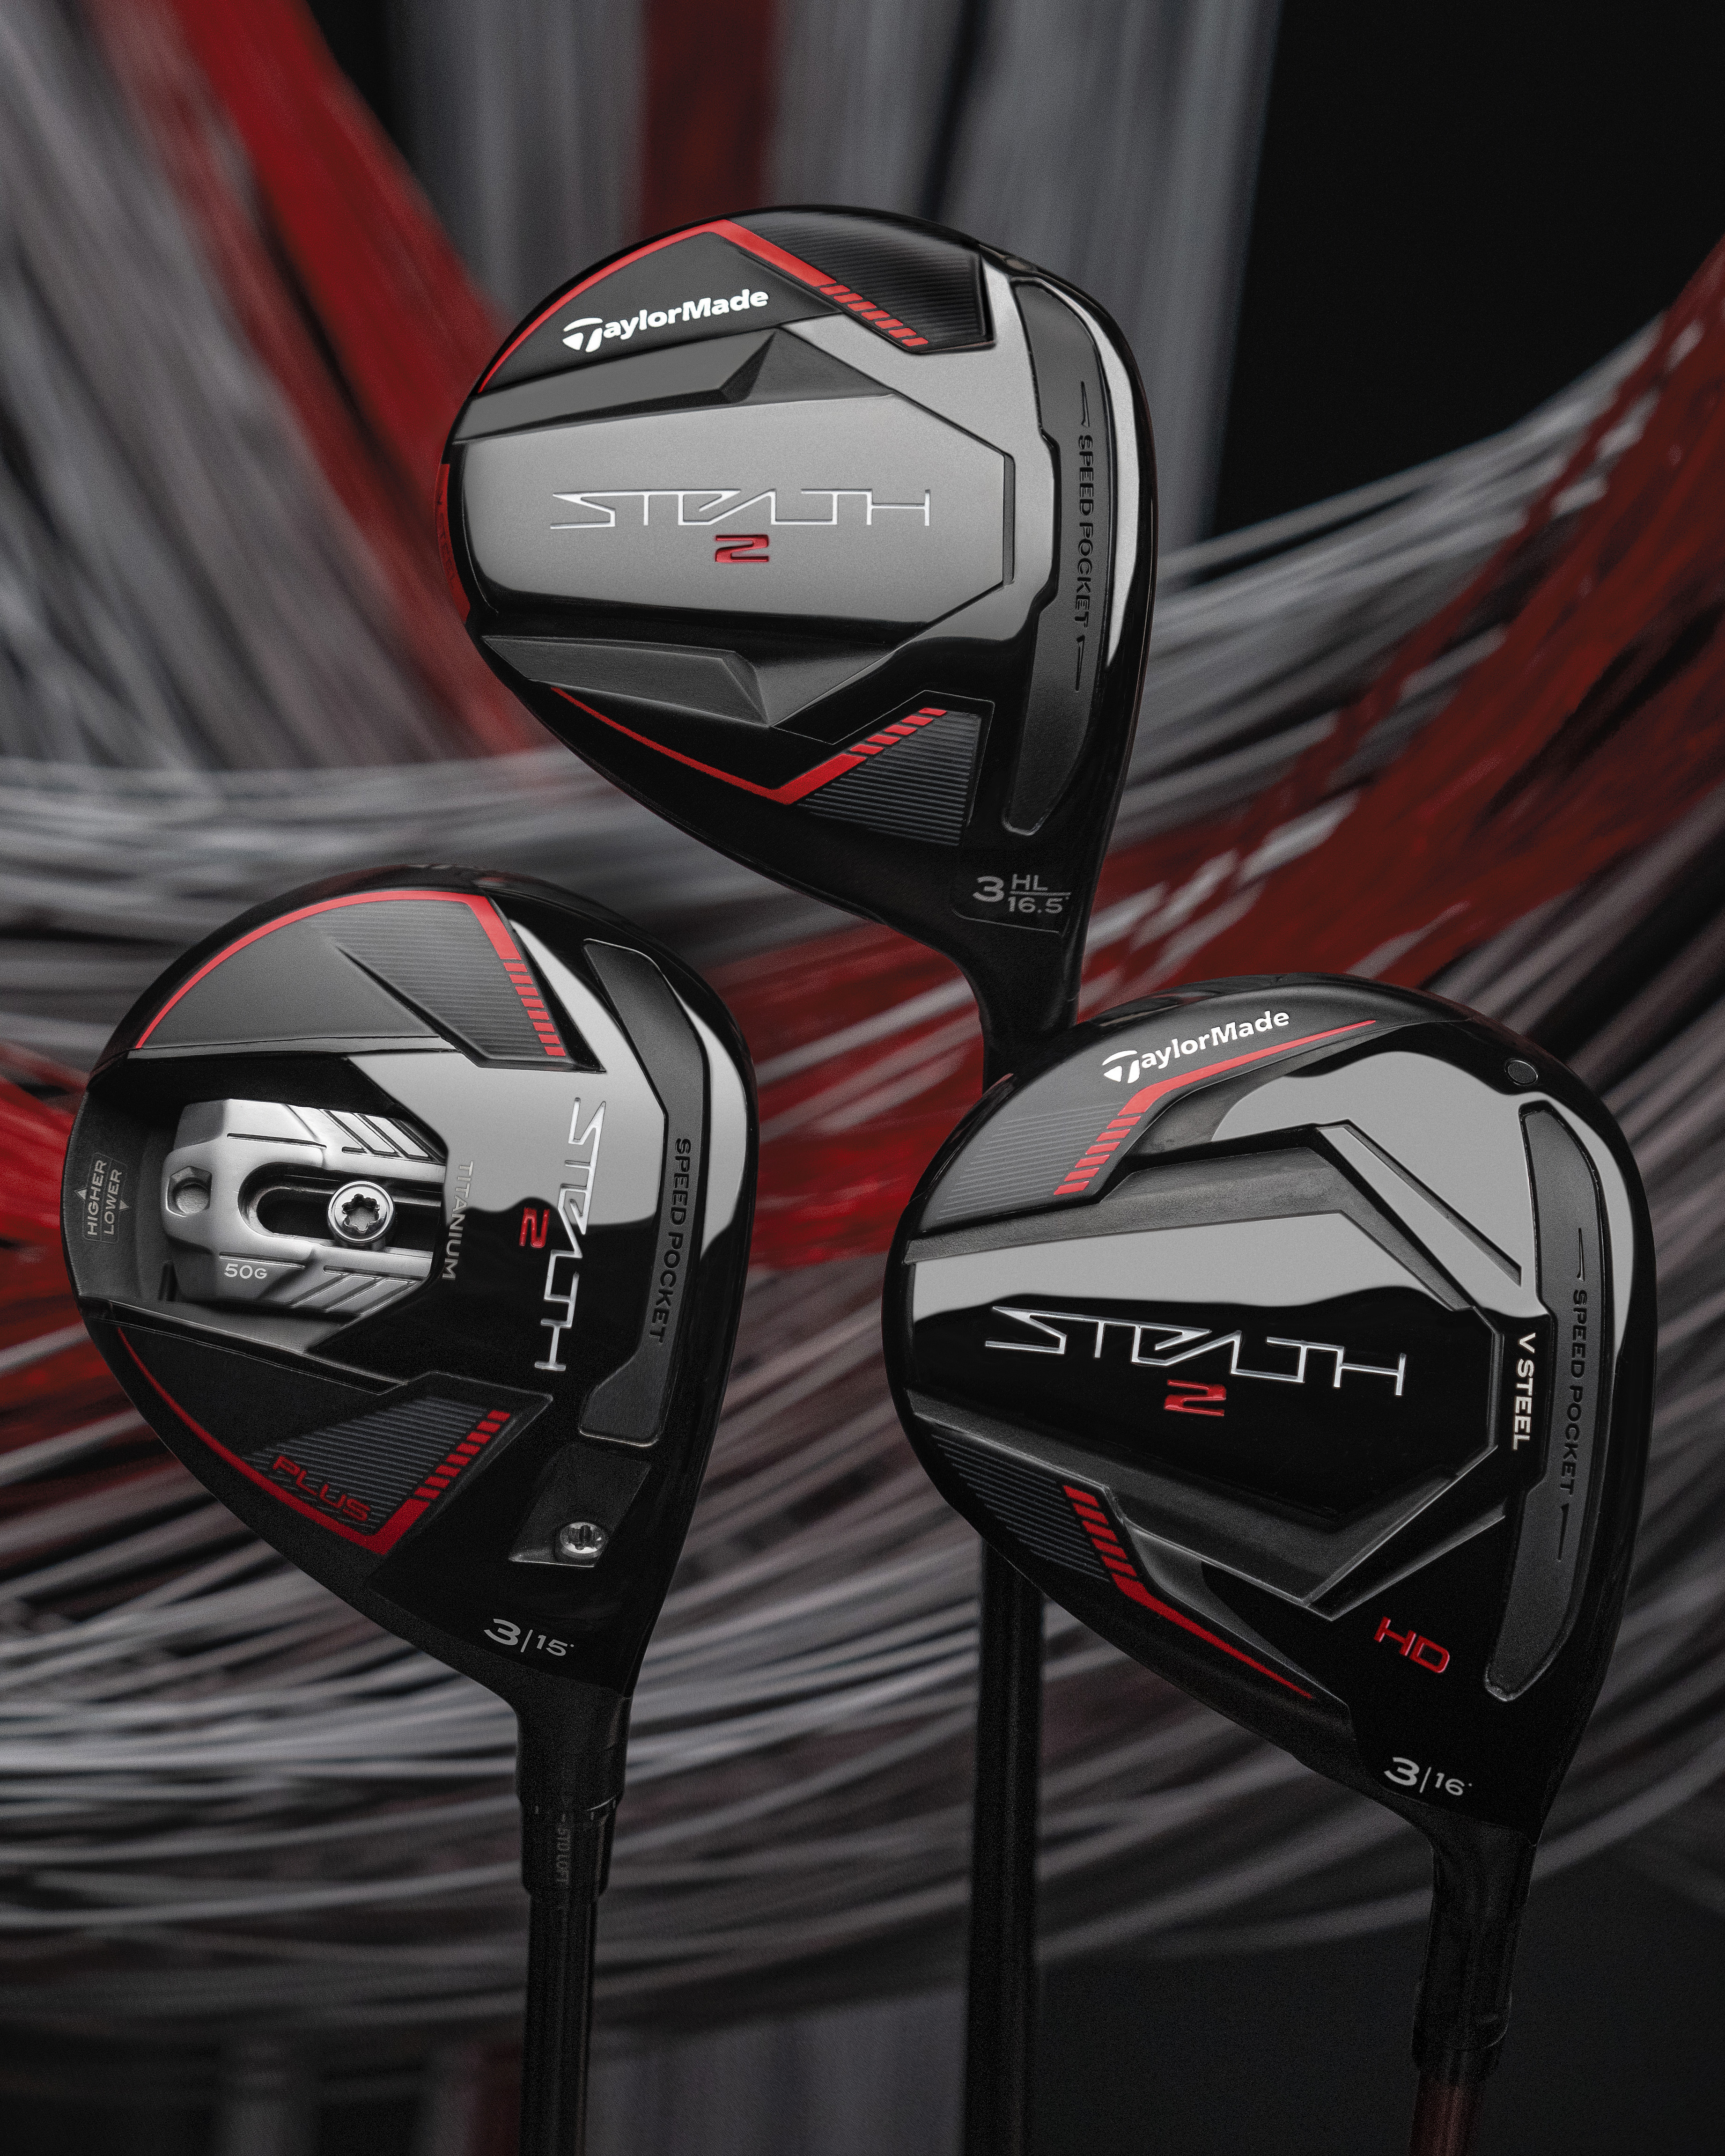 TaylorMade Stealth 2 fairway woods, hybrids: What you need to know ...